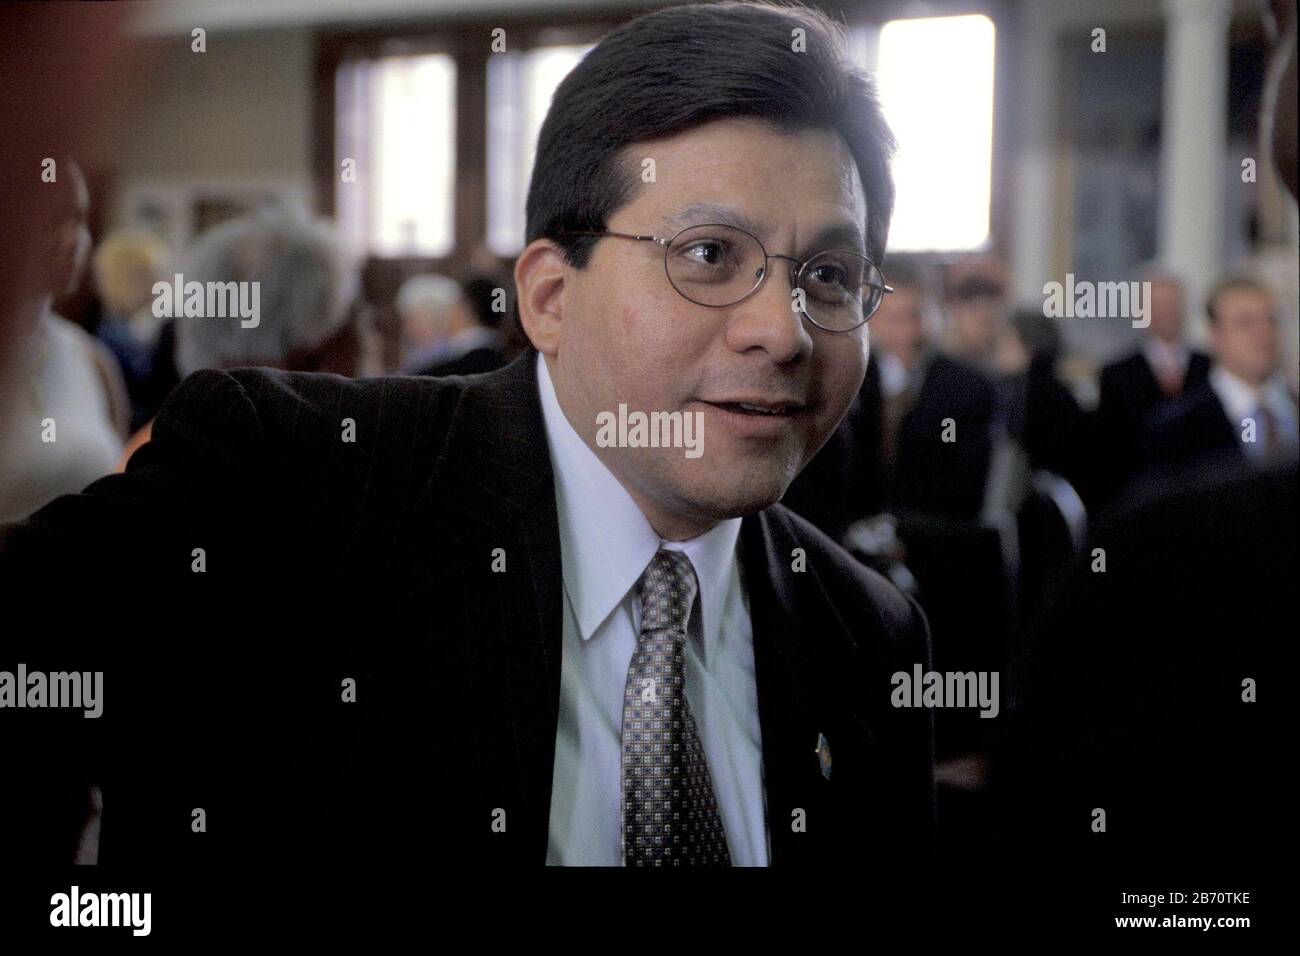 Austin Texas USA, 2001: Former Texas Supreme Court justice Alberto Gonzales makes appearance at Texas Legislature after being appointed by Pres. George W. Bush as senior White House counsel.  ©Bob Daemmrich Stock Photo